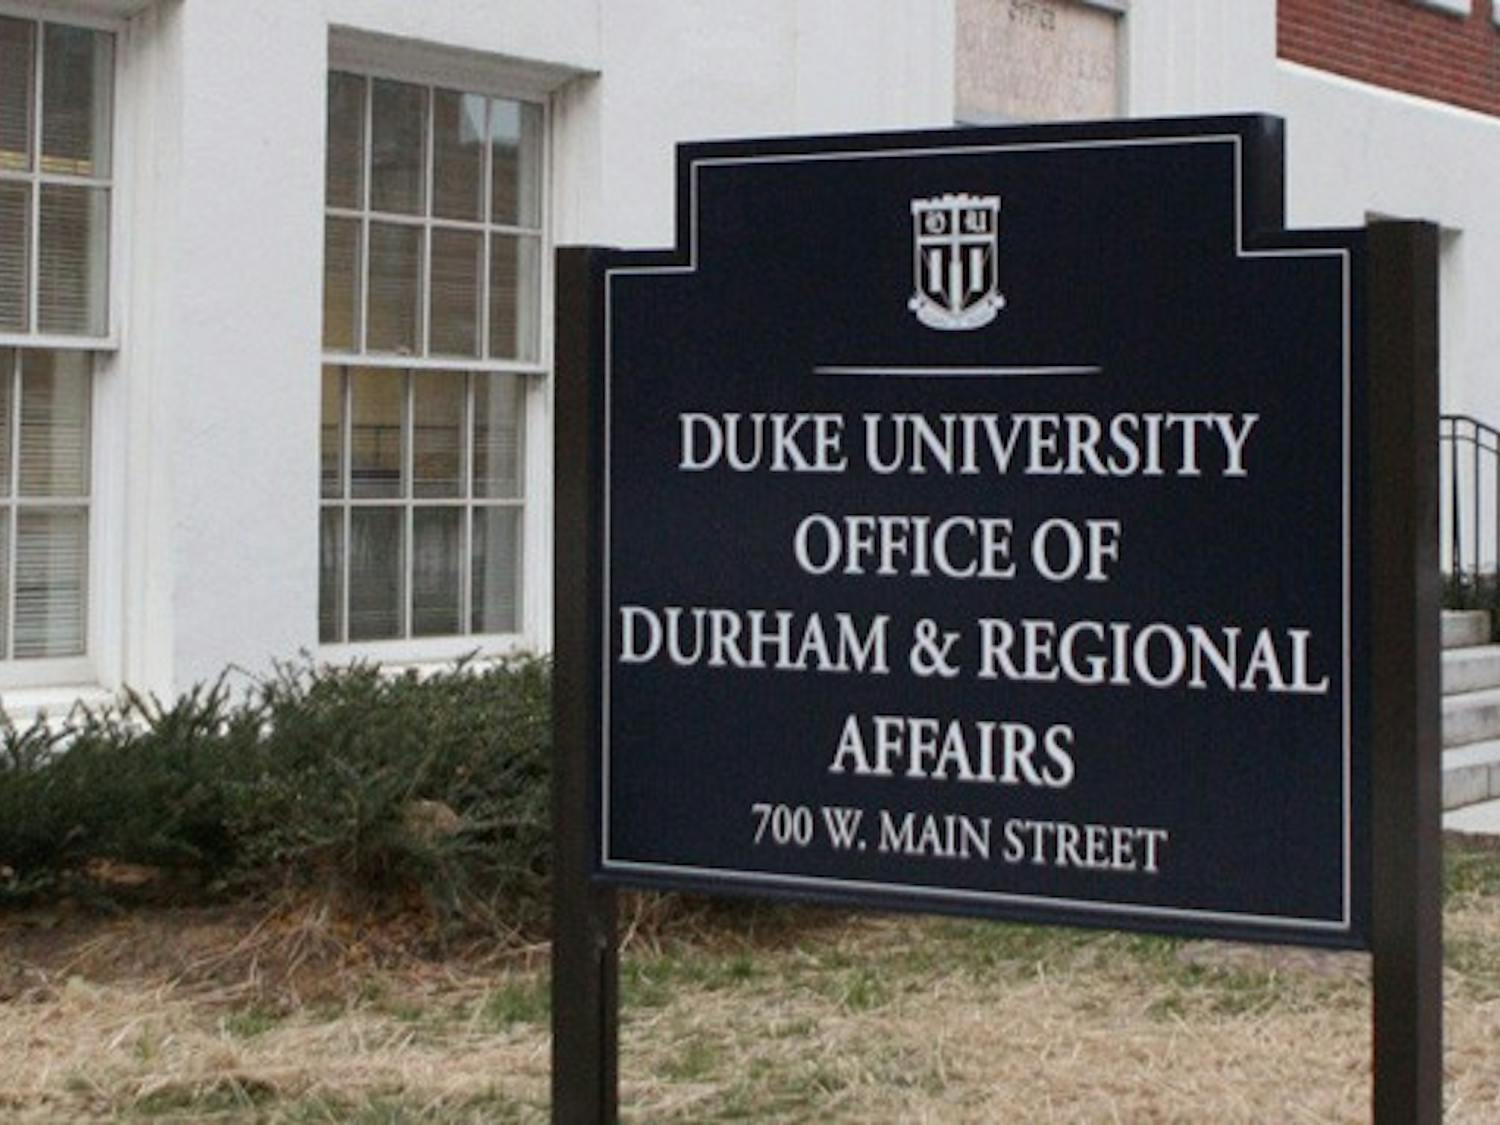 Durham leaders have expressed frustration with budget cuts that have forced the Office of Durham and Regional Affairs to lay off two employees.